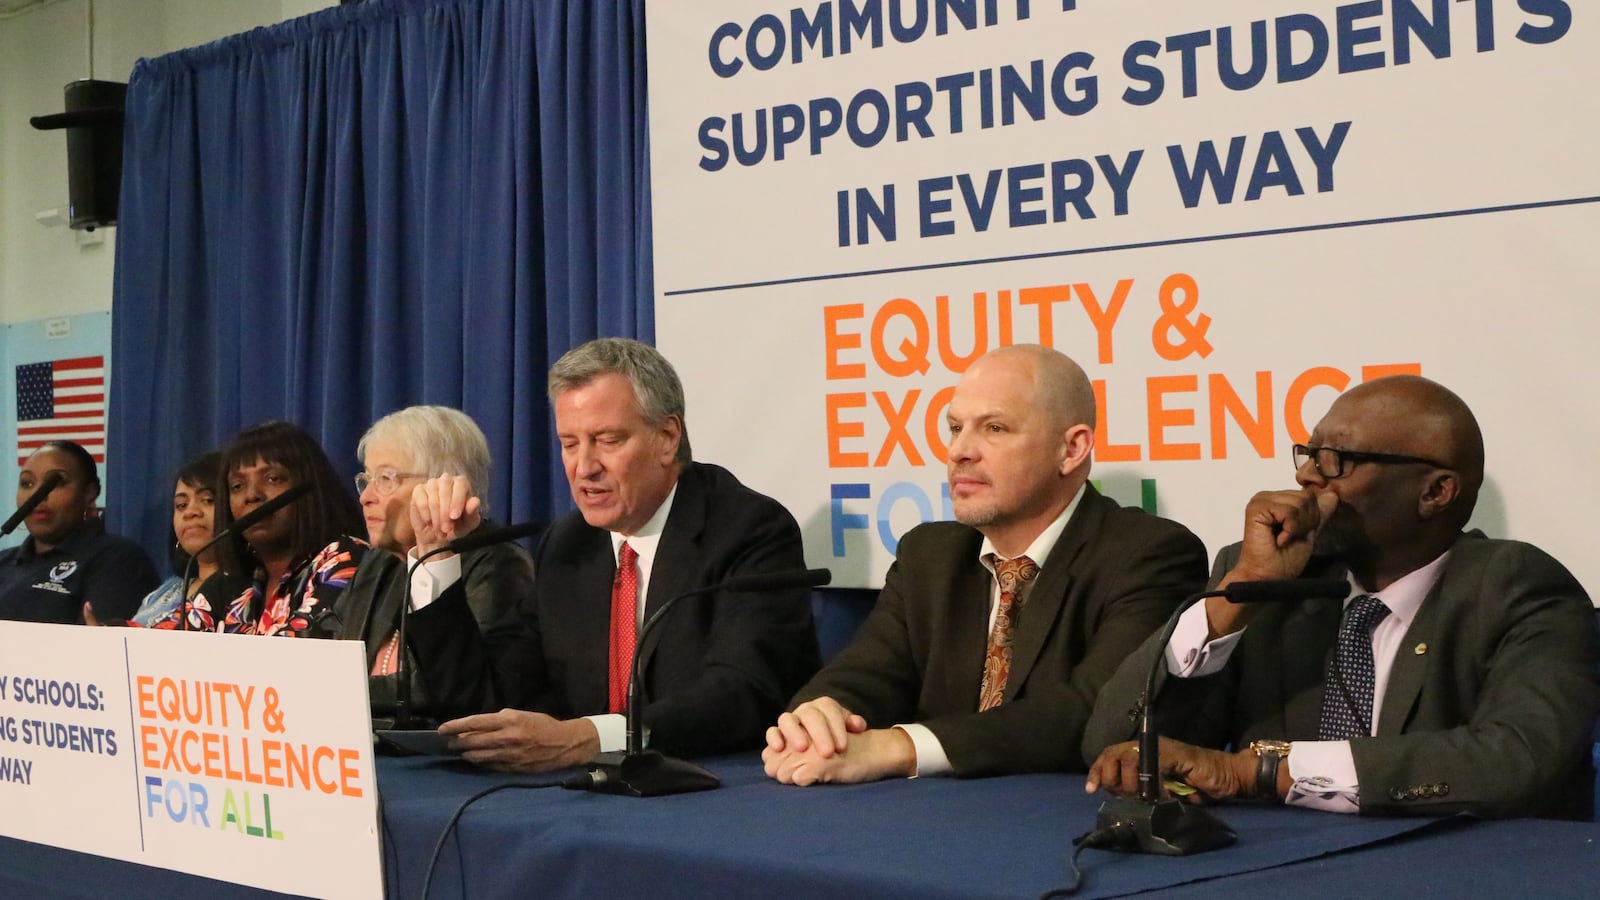 Mayor Bill de Blasio, flanked by schools Chancellor Carmen Fariña and UFT chief Michael Mulgrew announced an expansion of the city's community schools program at Brooklyn’s I.S. 155.